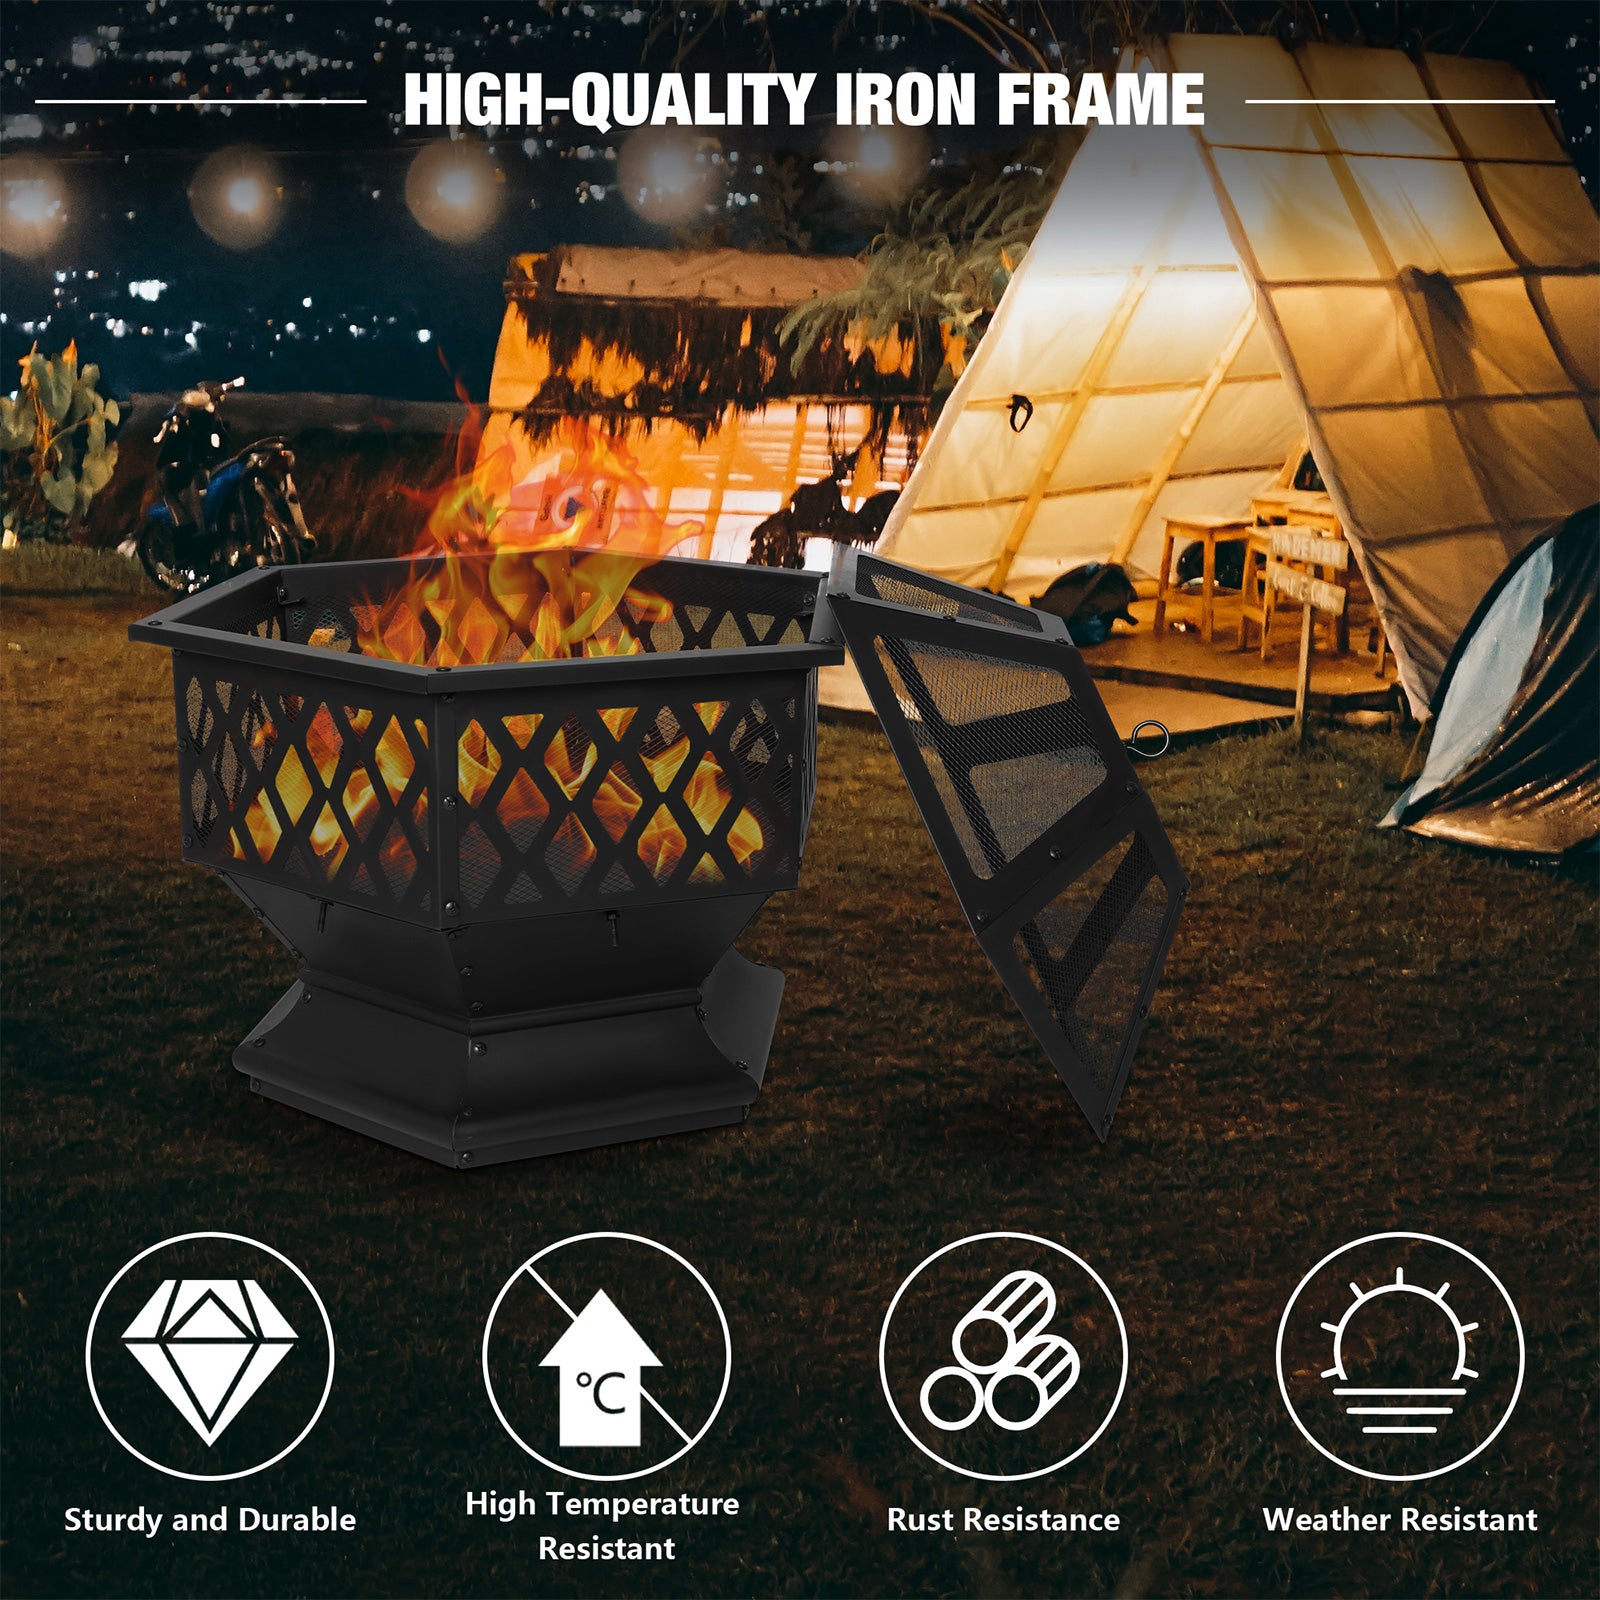 27.6" Hex Outdoor Wood Burning Fire Pit Patio Fireplace with Spark Screen and Poker